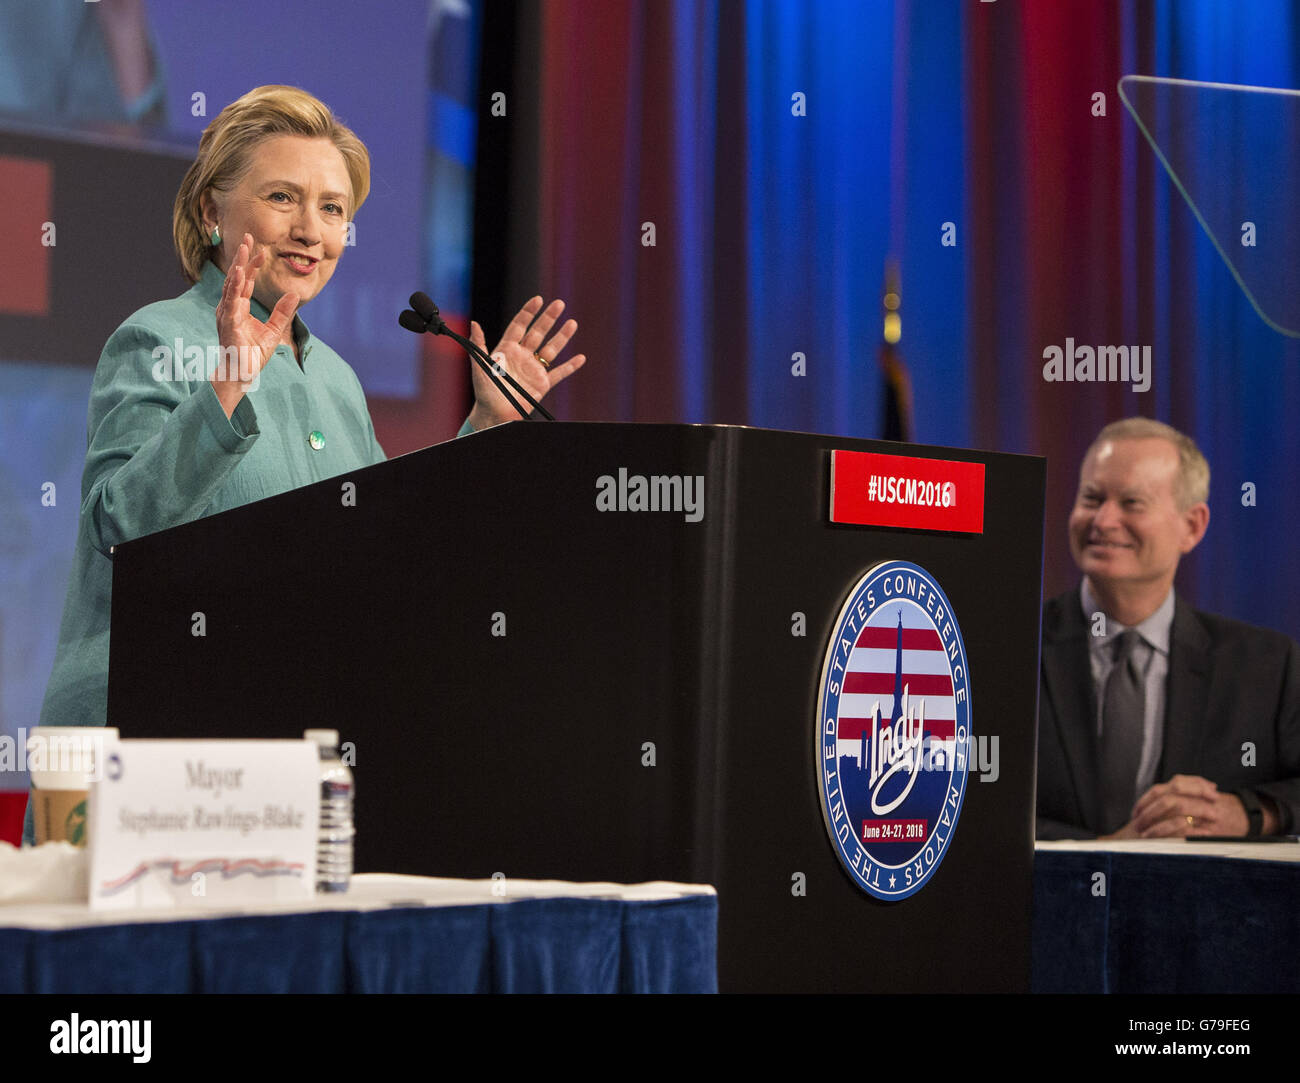 Indianapolis, Indiana, USA. 26th June, 2016. Presumptive Democratic presidential nominee HILLARY CLINTON spoke at the U.S. Conference of Mayors in Indianapolis, Indiana on Sunday, June 26, 2016 Credit:  Lora Olive/ZUMA Wire/Alamy Live News Stock Photo